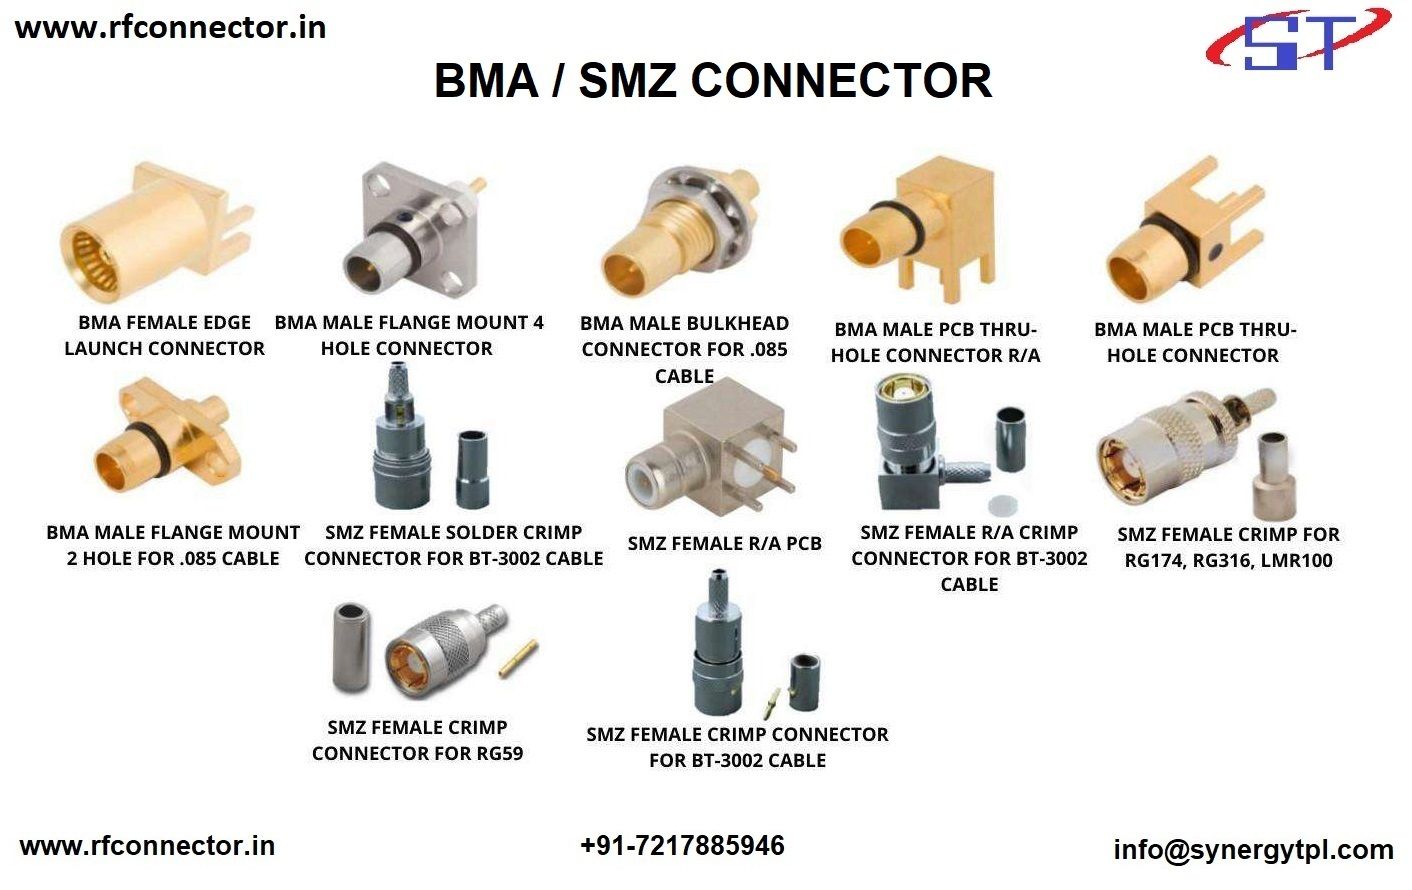 UHF male clamp connector for LMR 400 cable